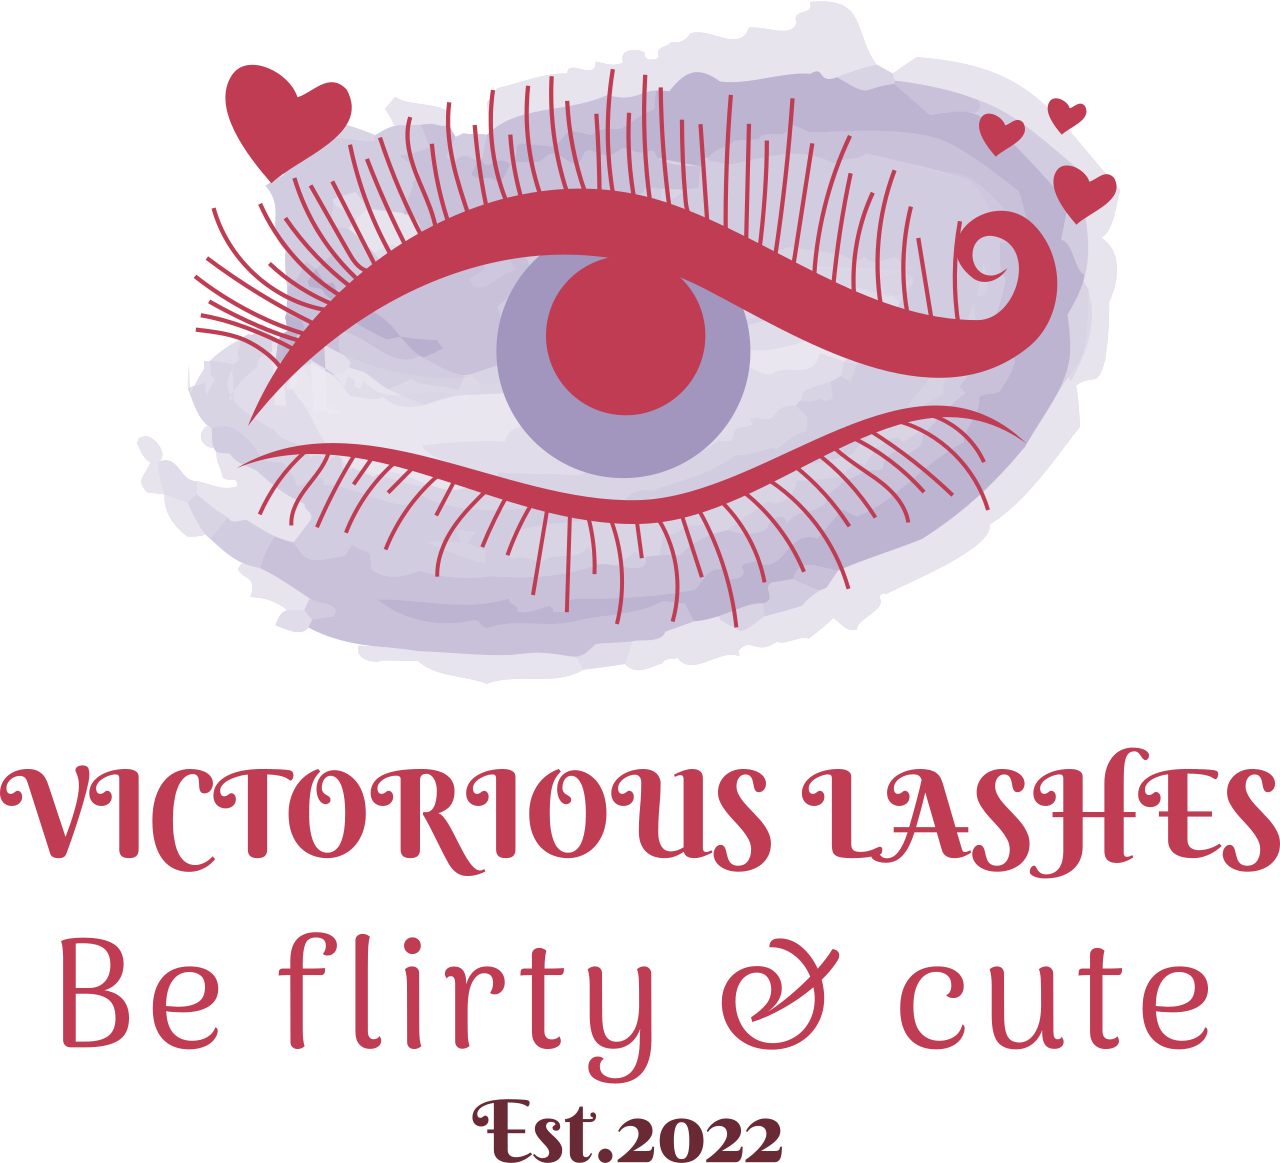  VICTORIOUS LASHES's web page